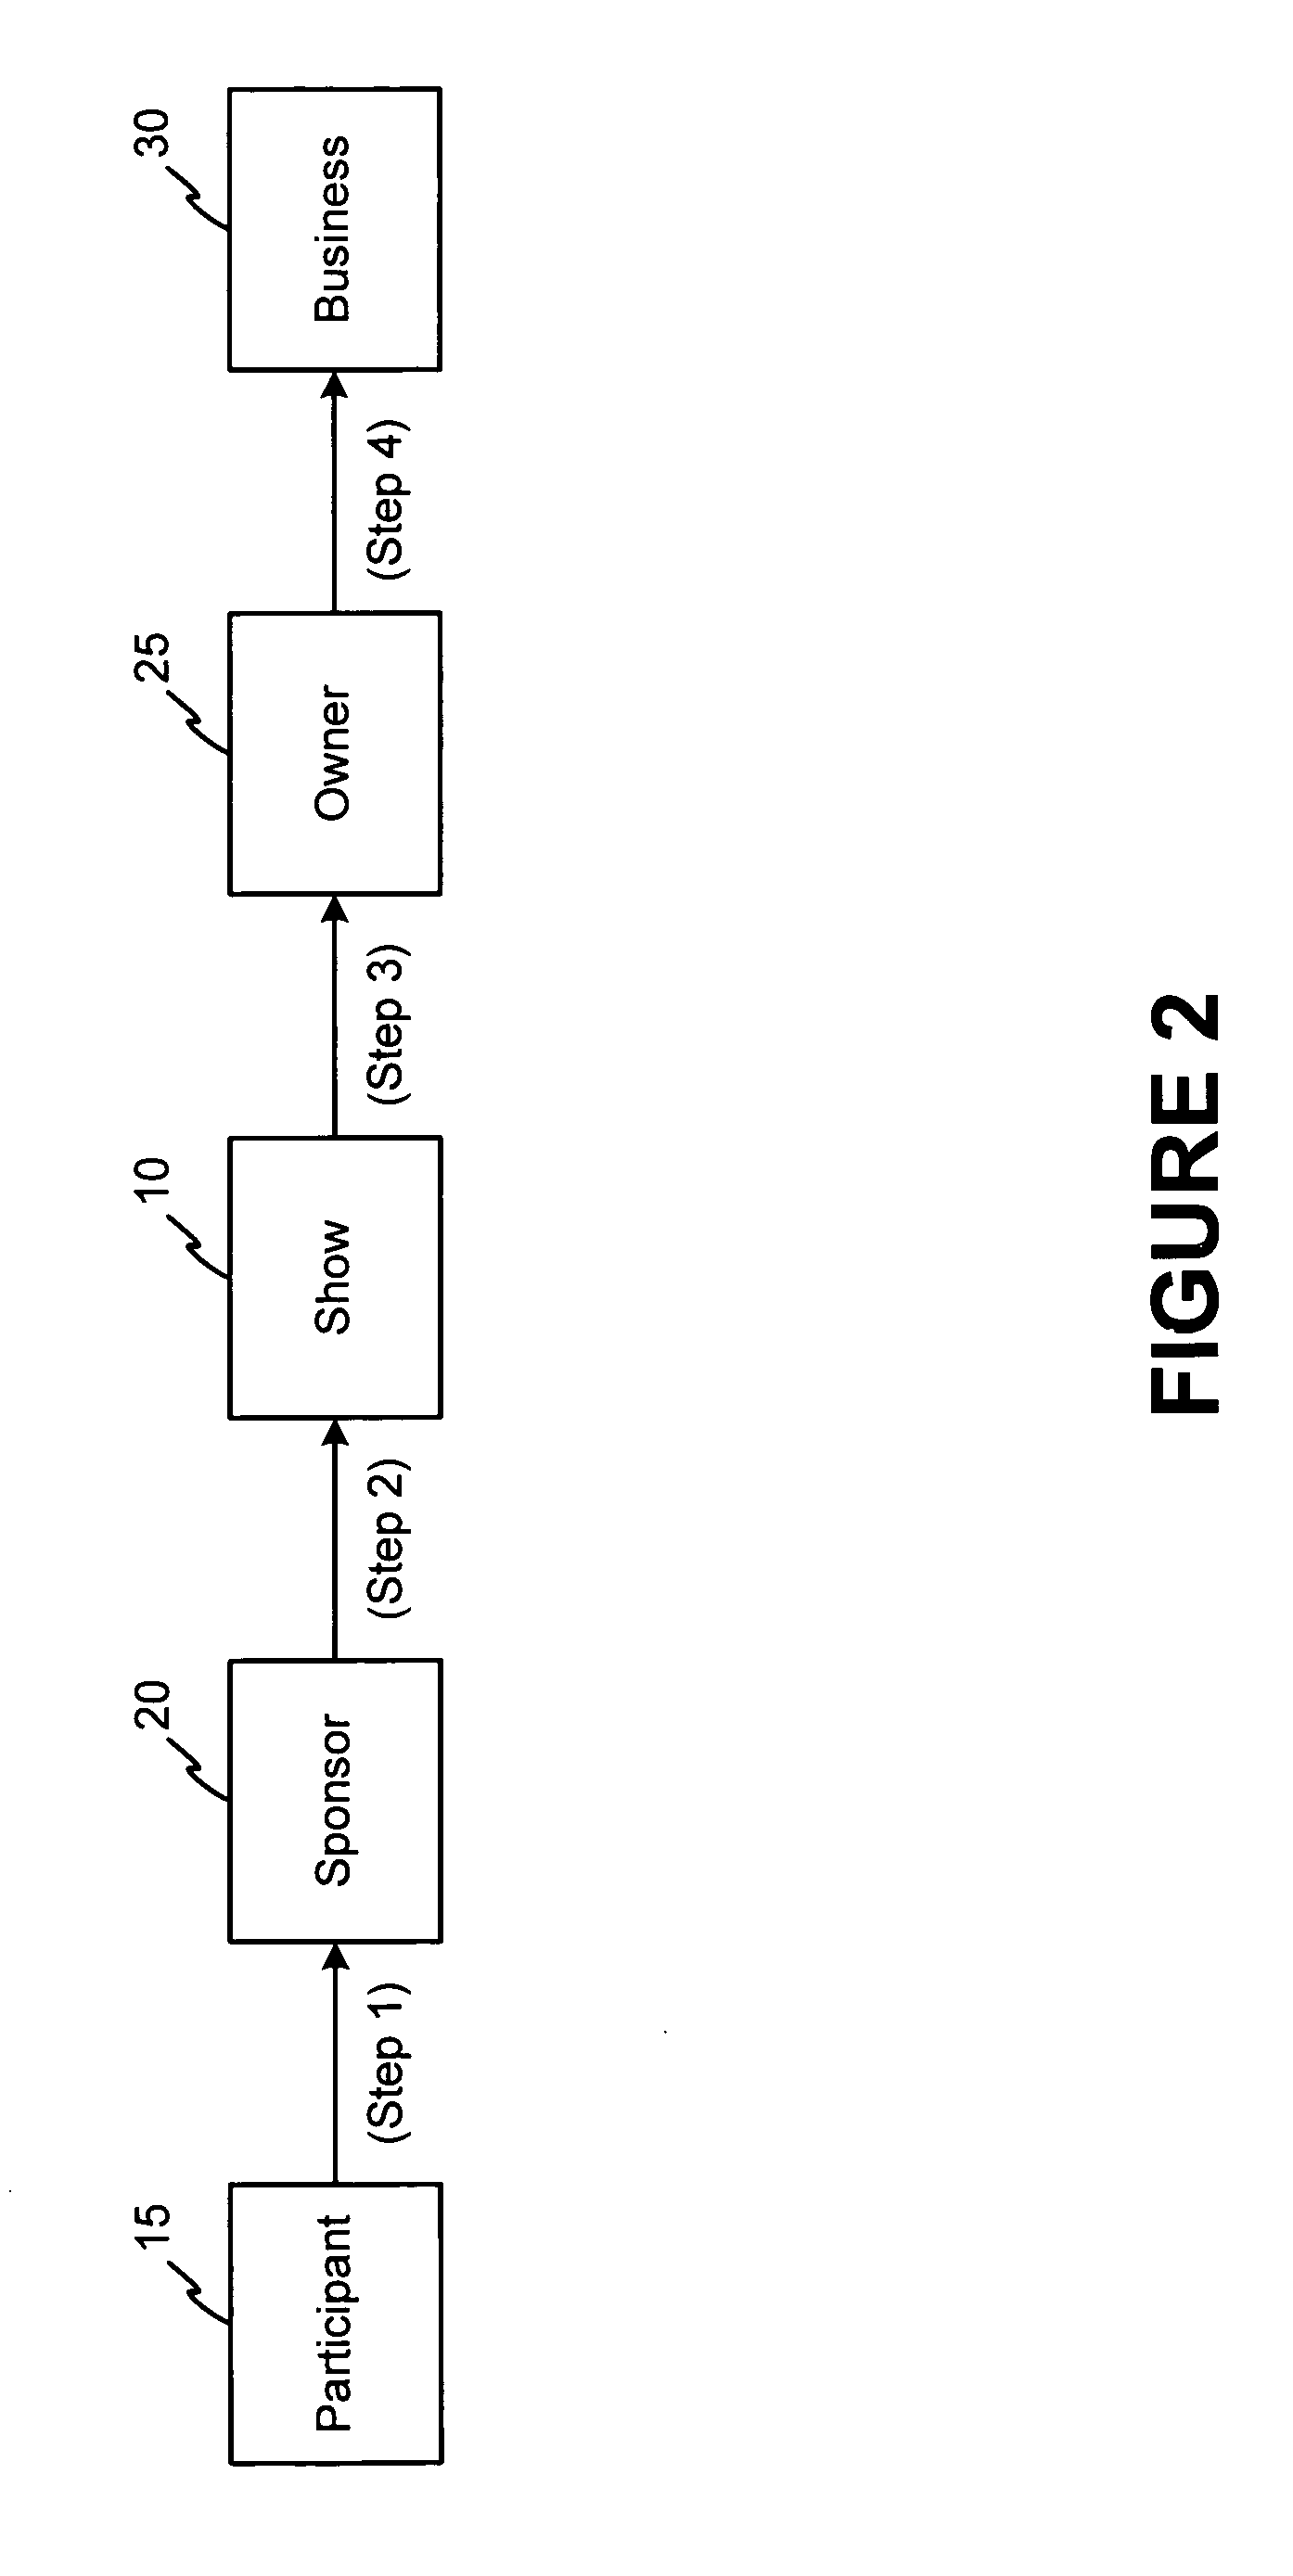 System and method for incorporation of products and services into reality television